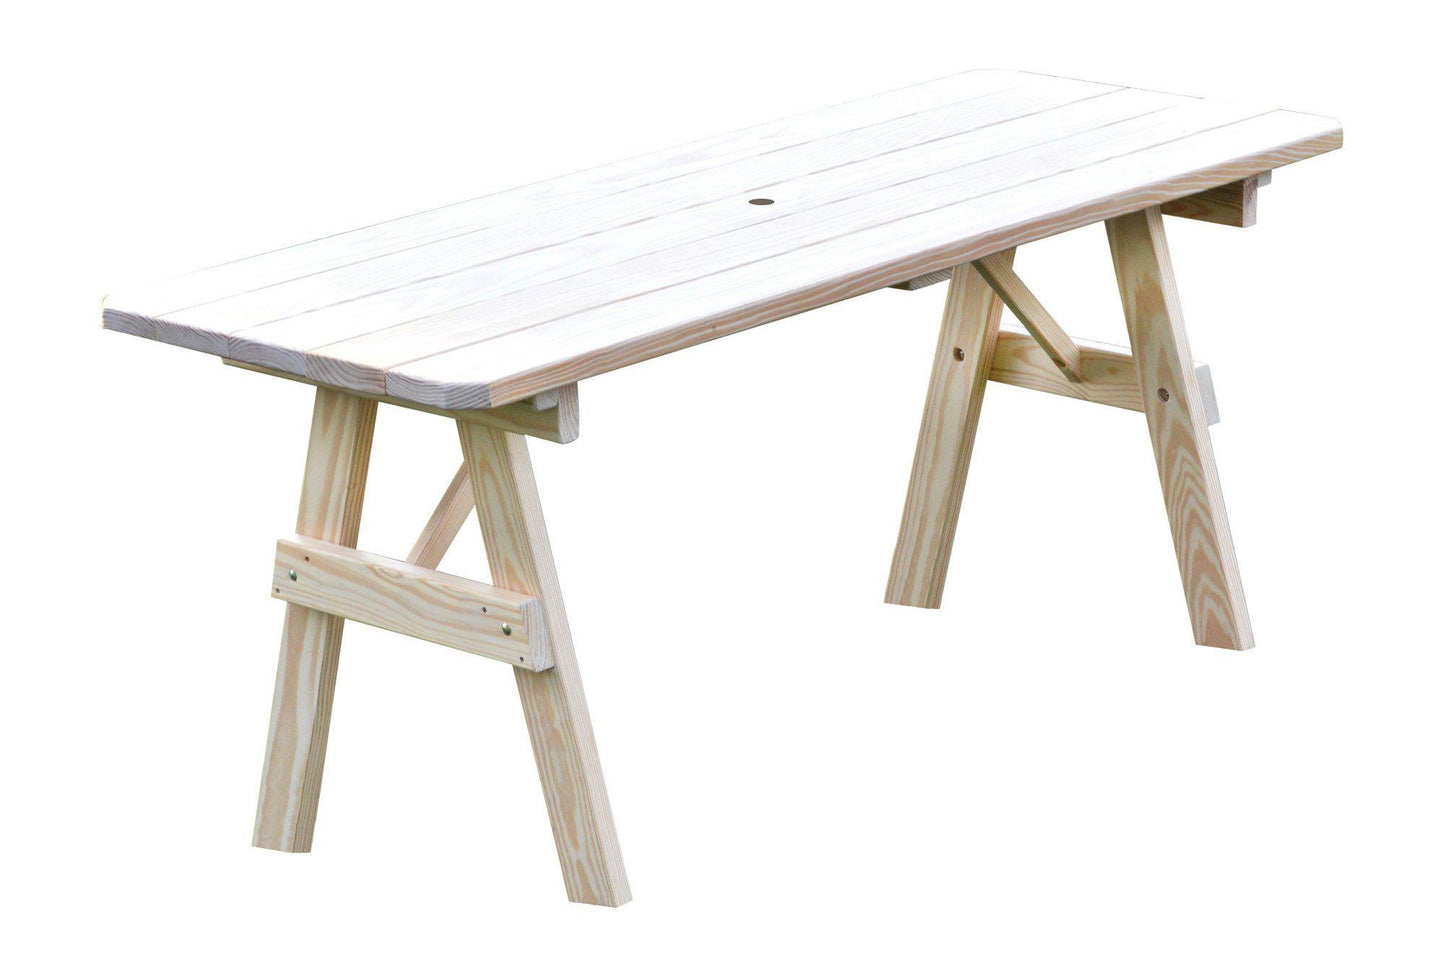 A&L Furniture Co. Pressure Treated Pine 6' Traditional Table Only - LEAD TIME TO SHIP 10 BUSINESS DAYS